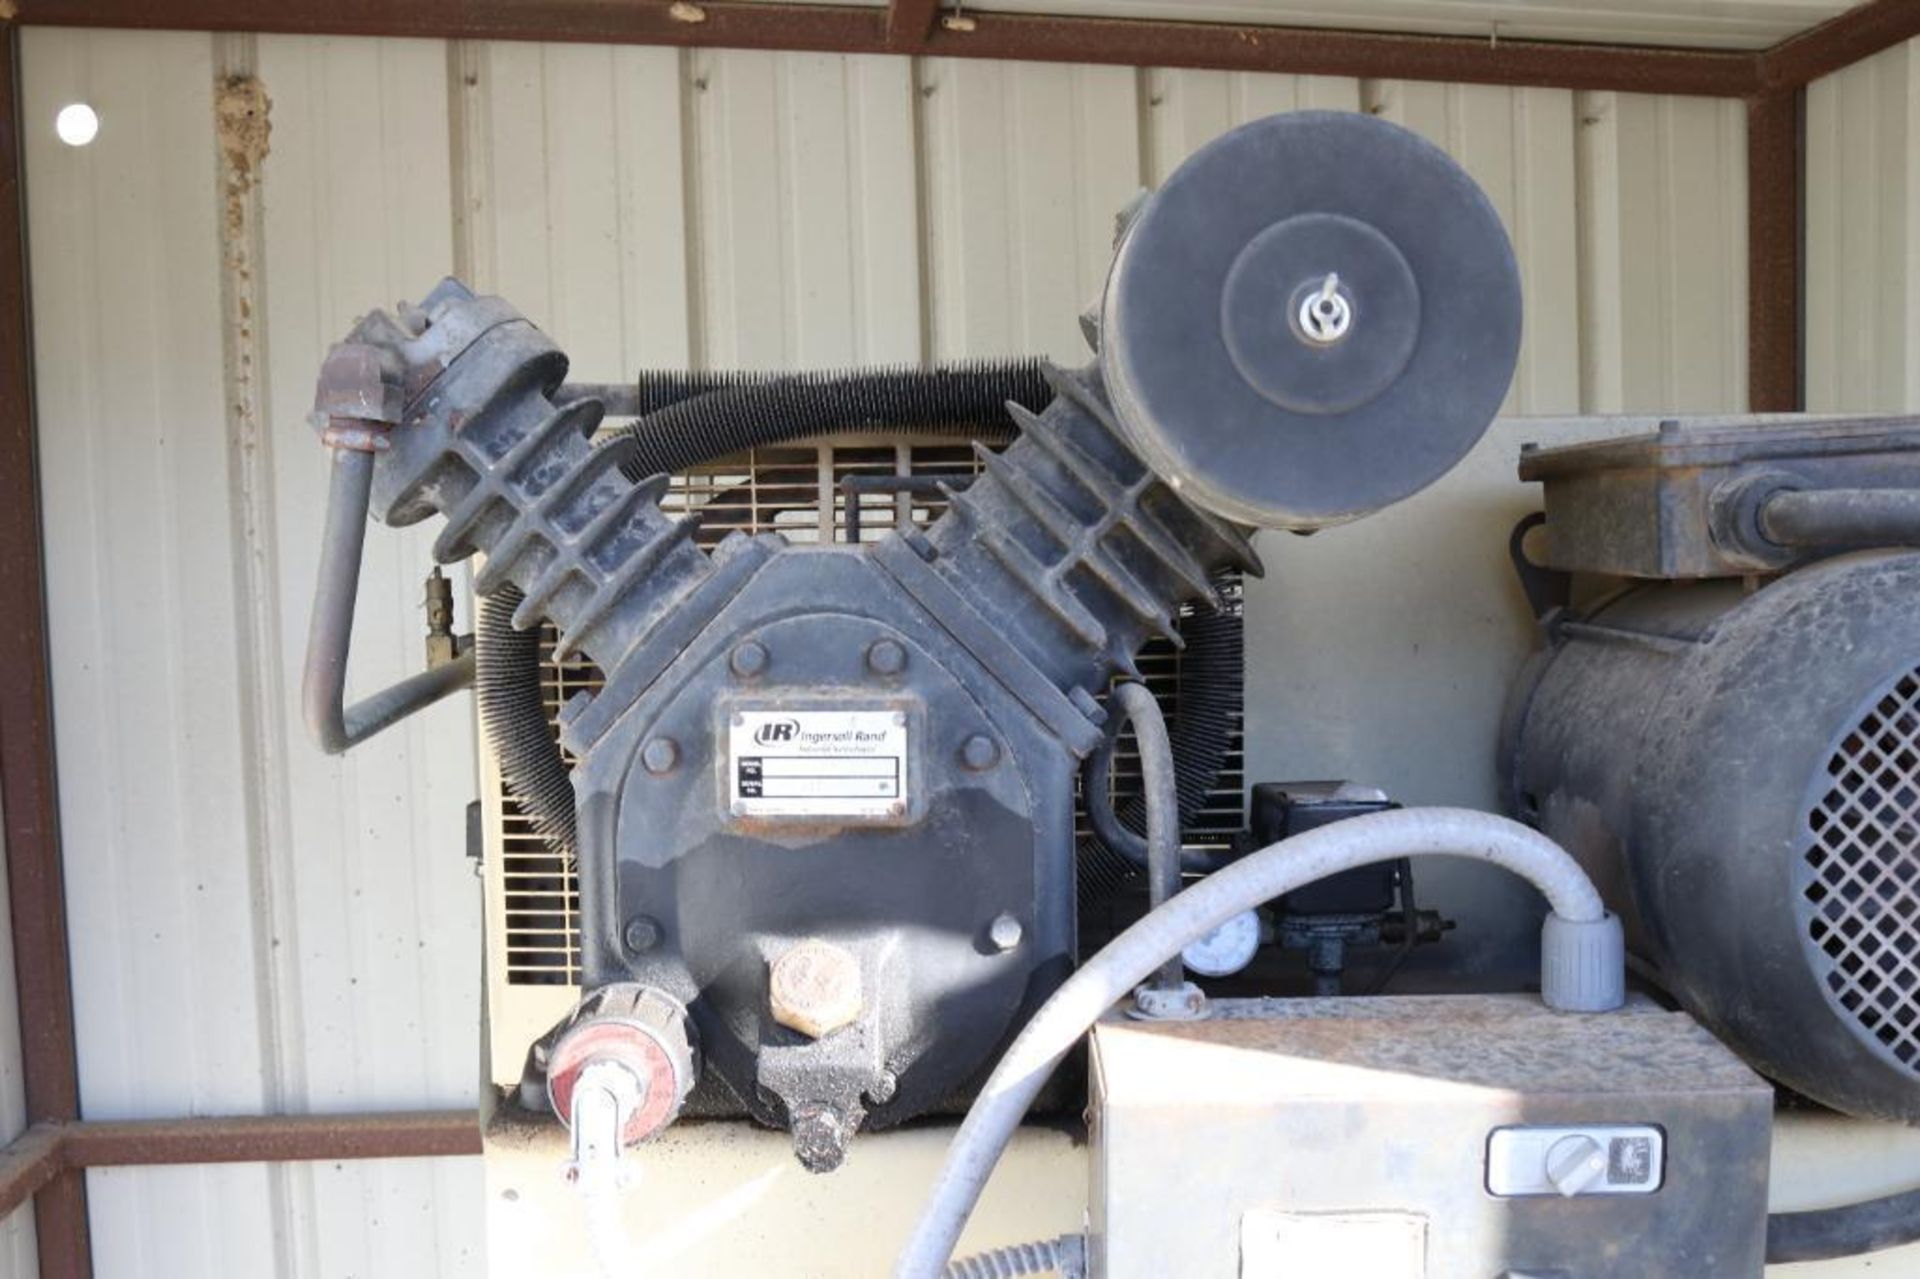 Ingersoll Rand Model 2475.5-P Two Stage Cast Iron Air Compressor Serial Number: CBV554476 230V 60Hz - Image 3 of 9